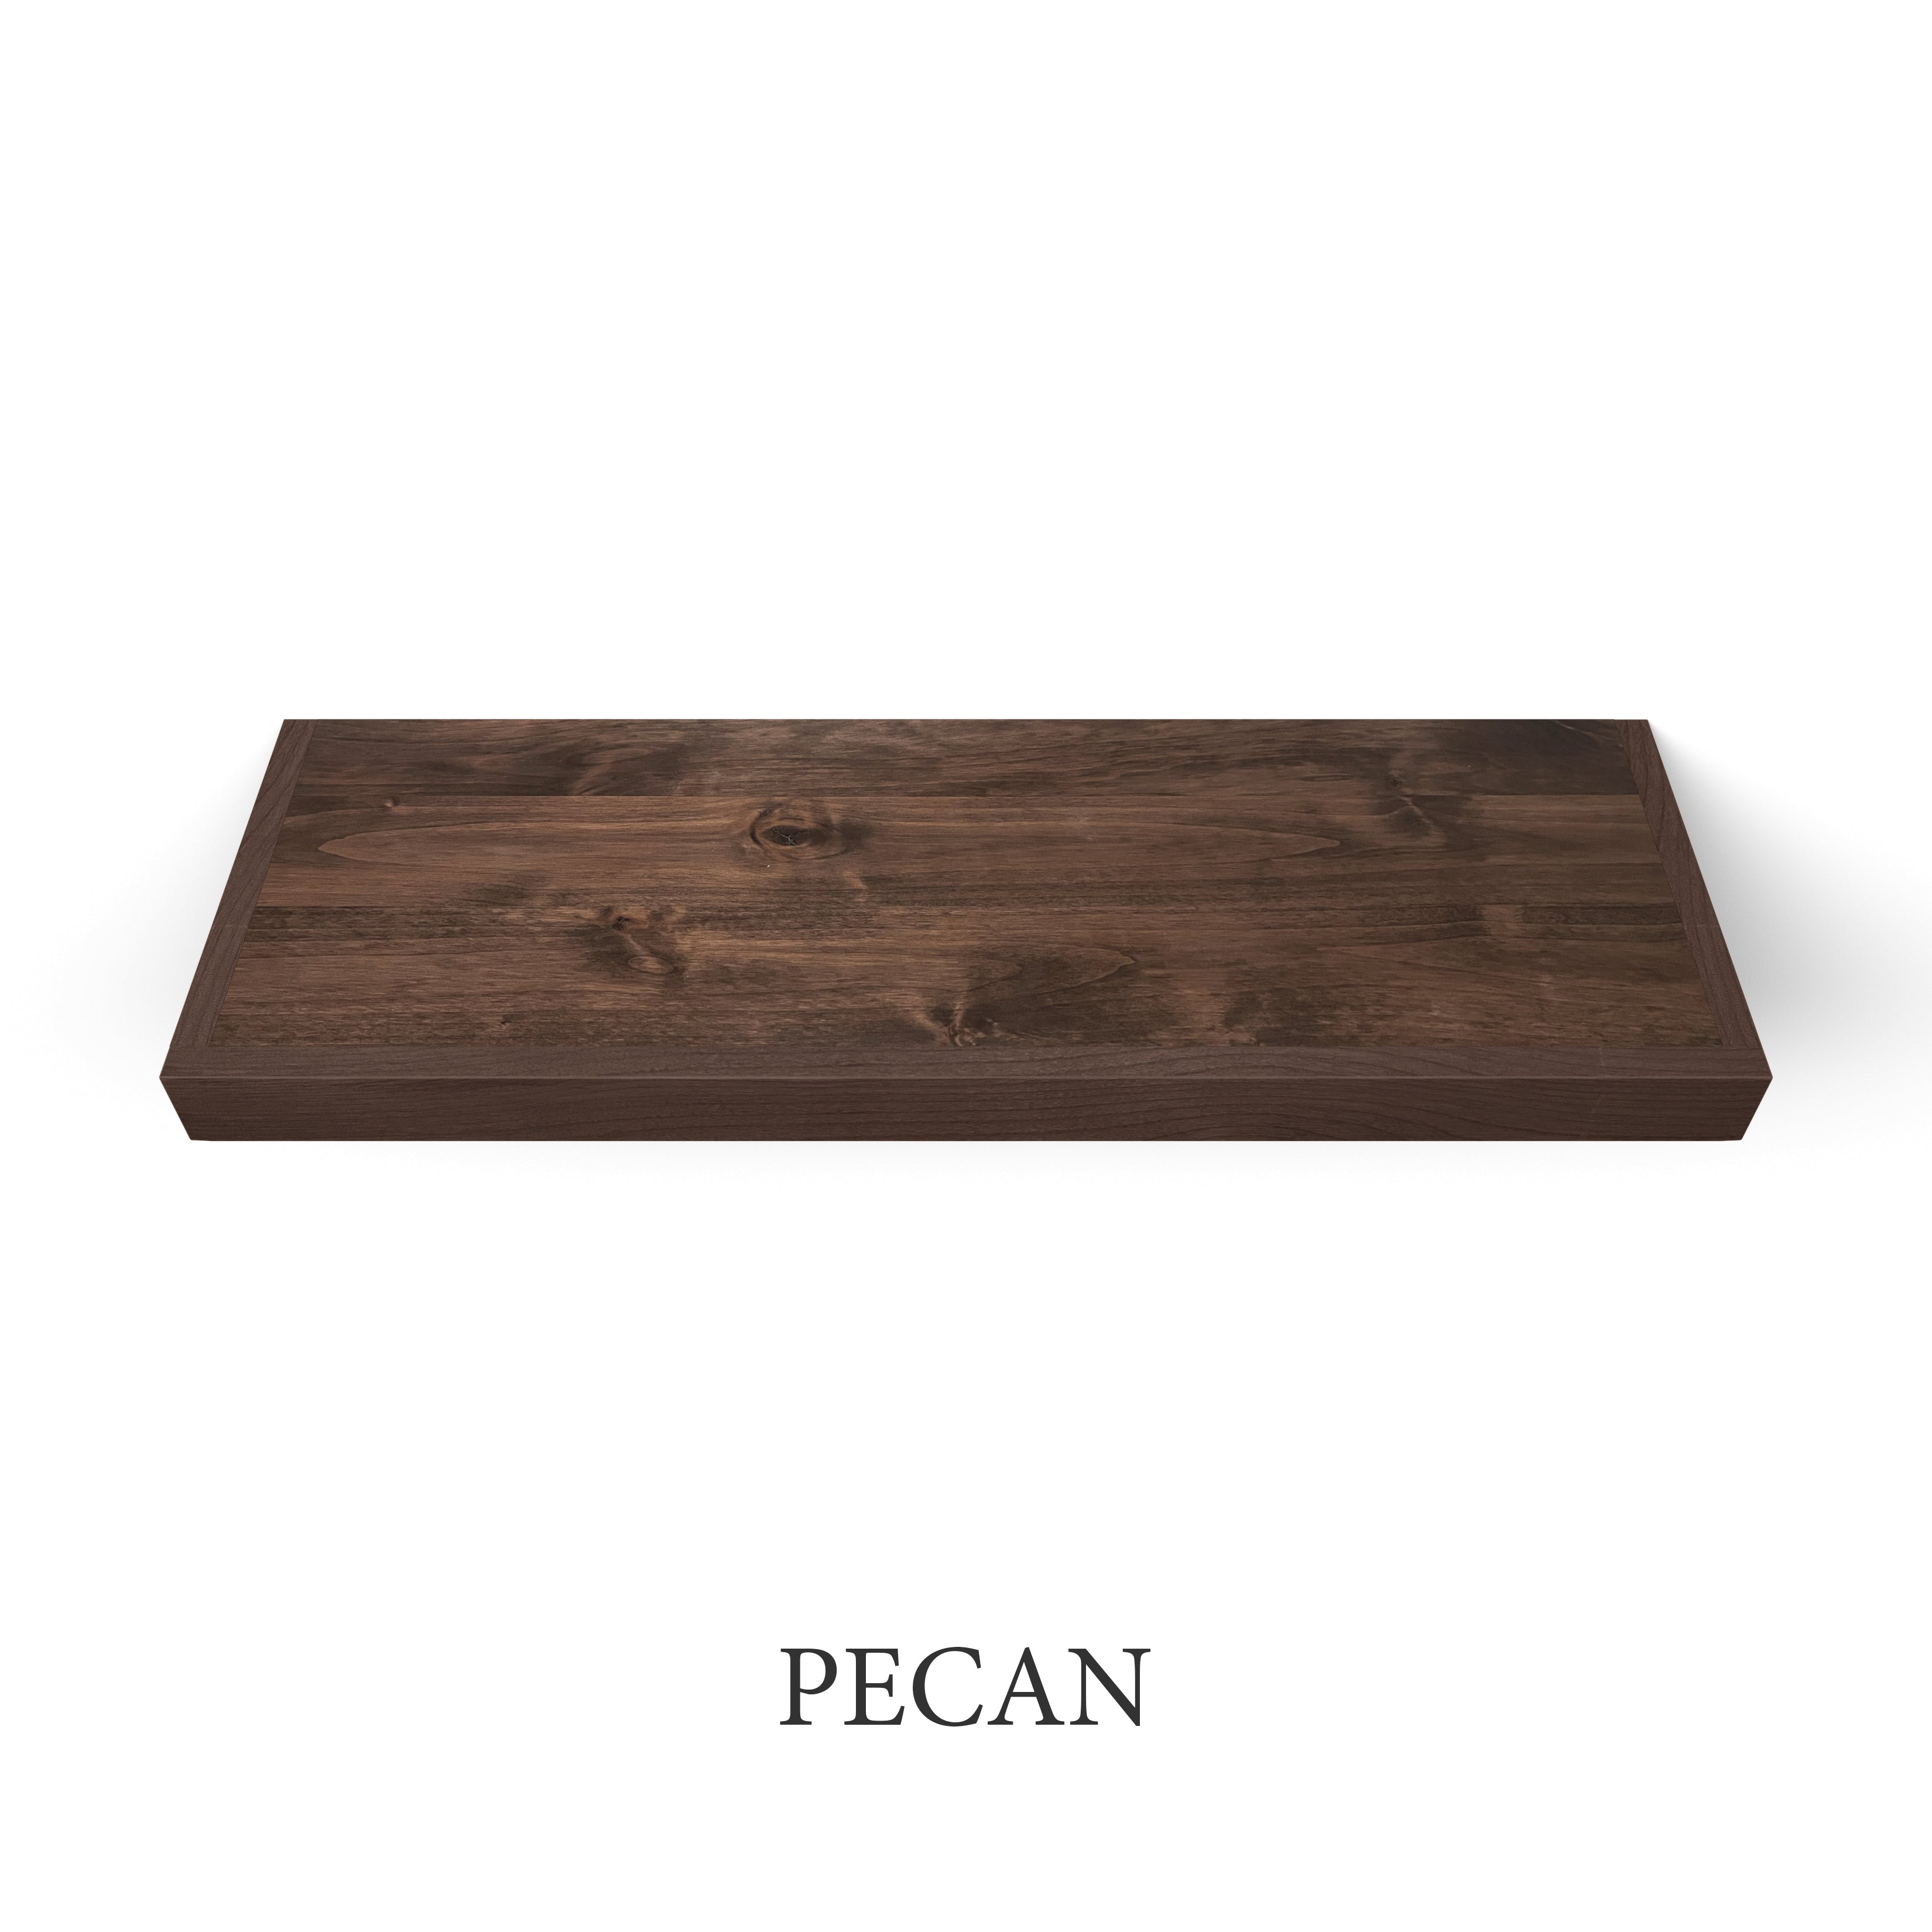 pacan Rustic Alder 2 Inch Thick LED Lighted Floating Shelves - Hardwired